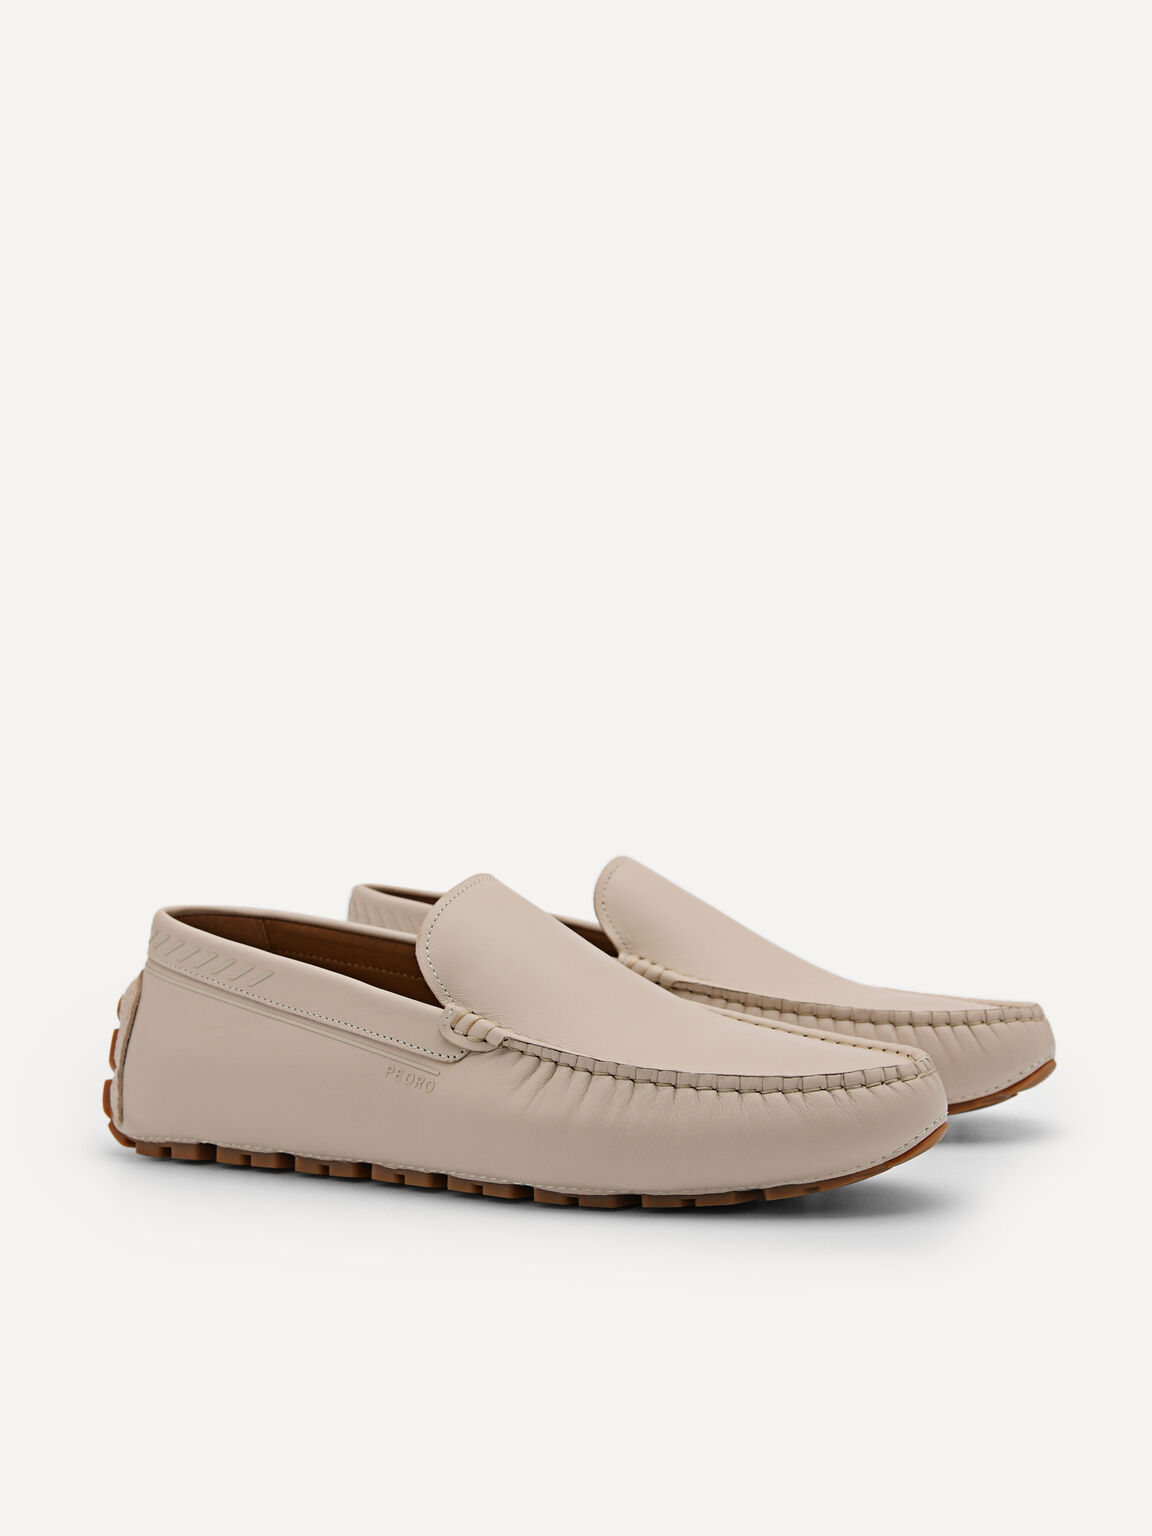 Leather Moccasins, Sand